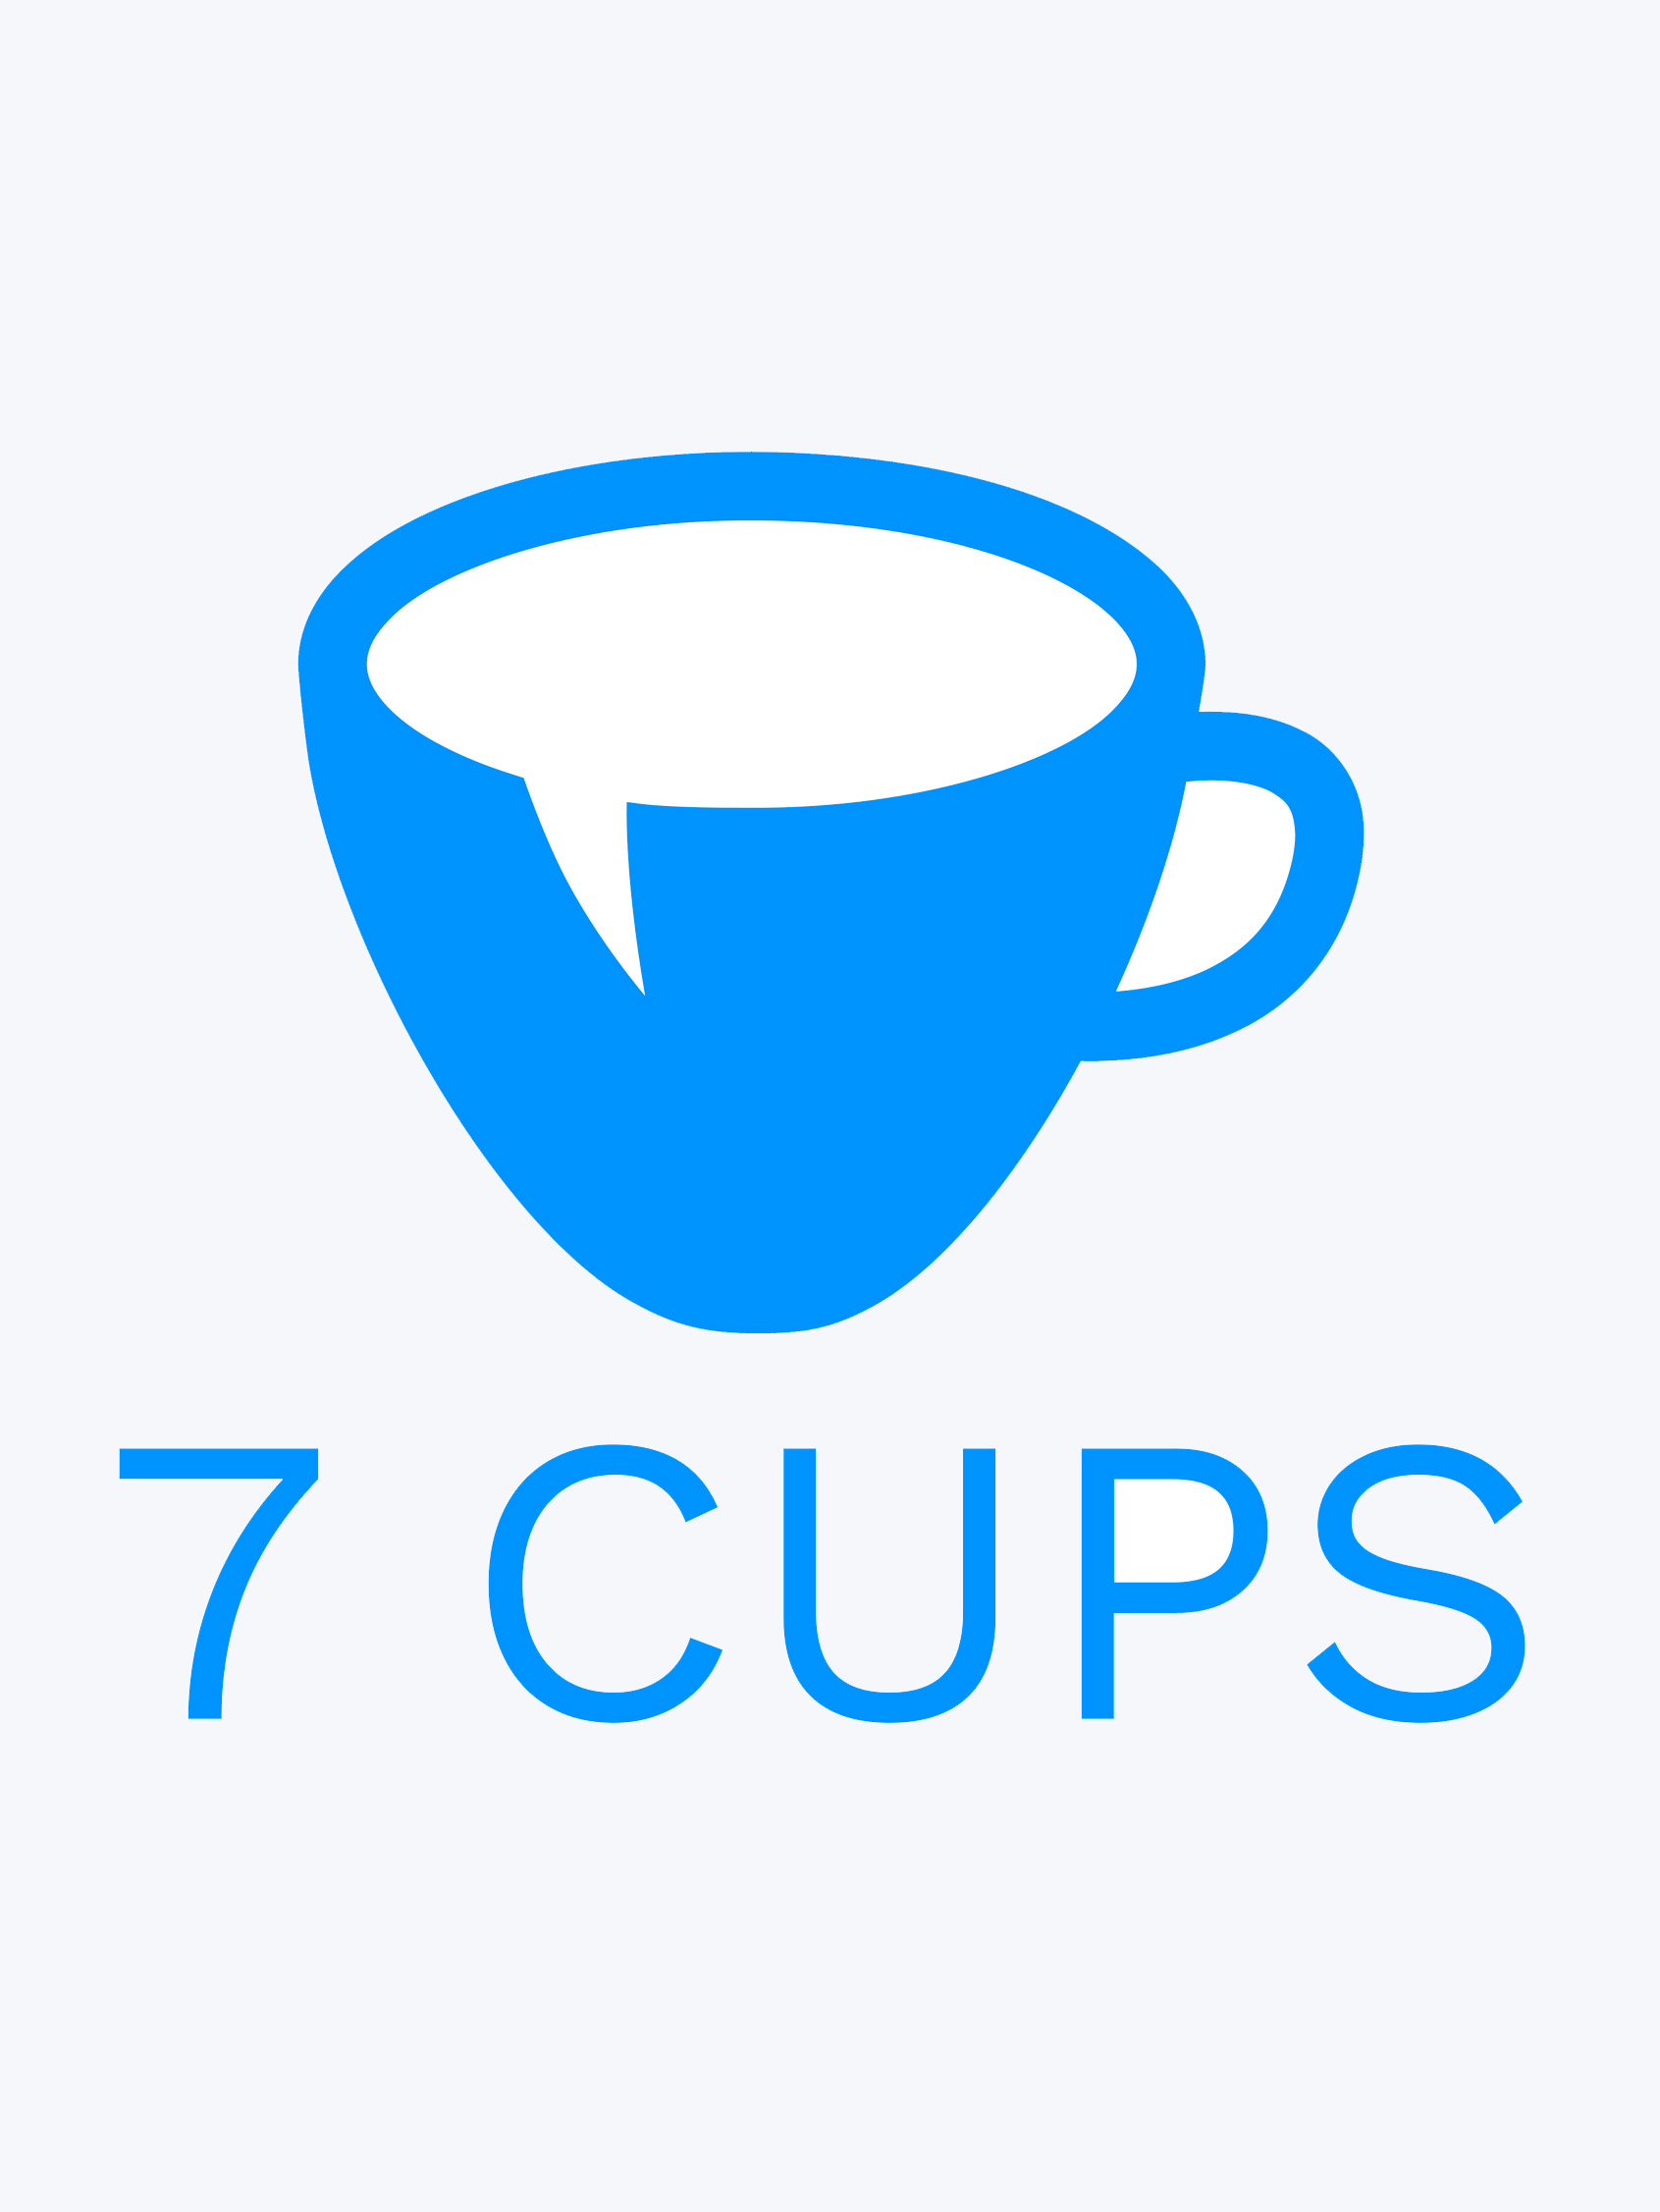 The 7 Cups logo.